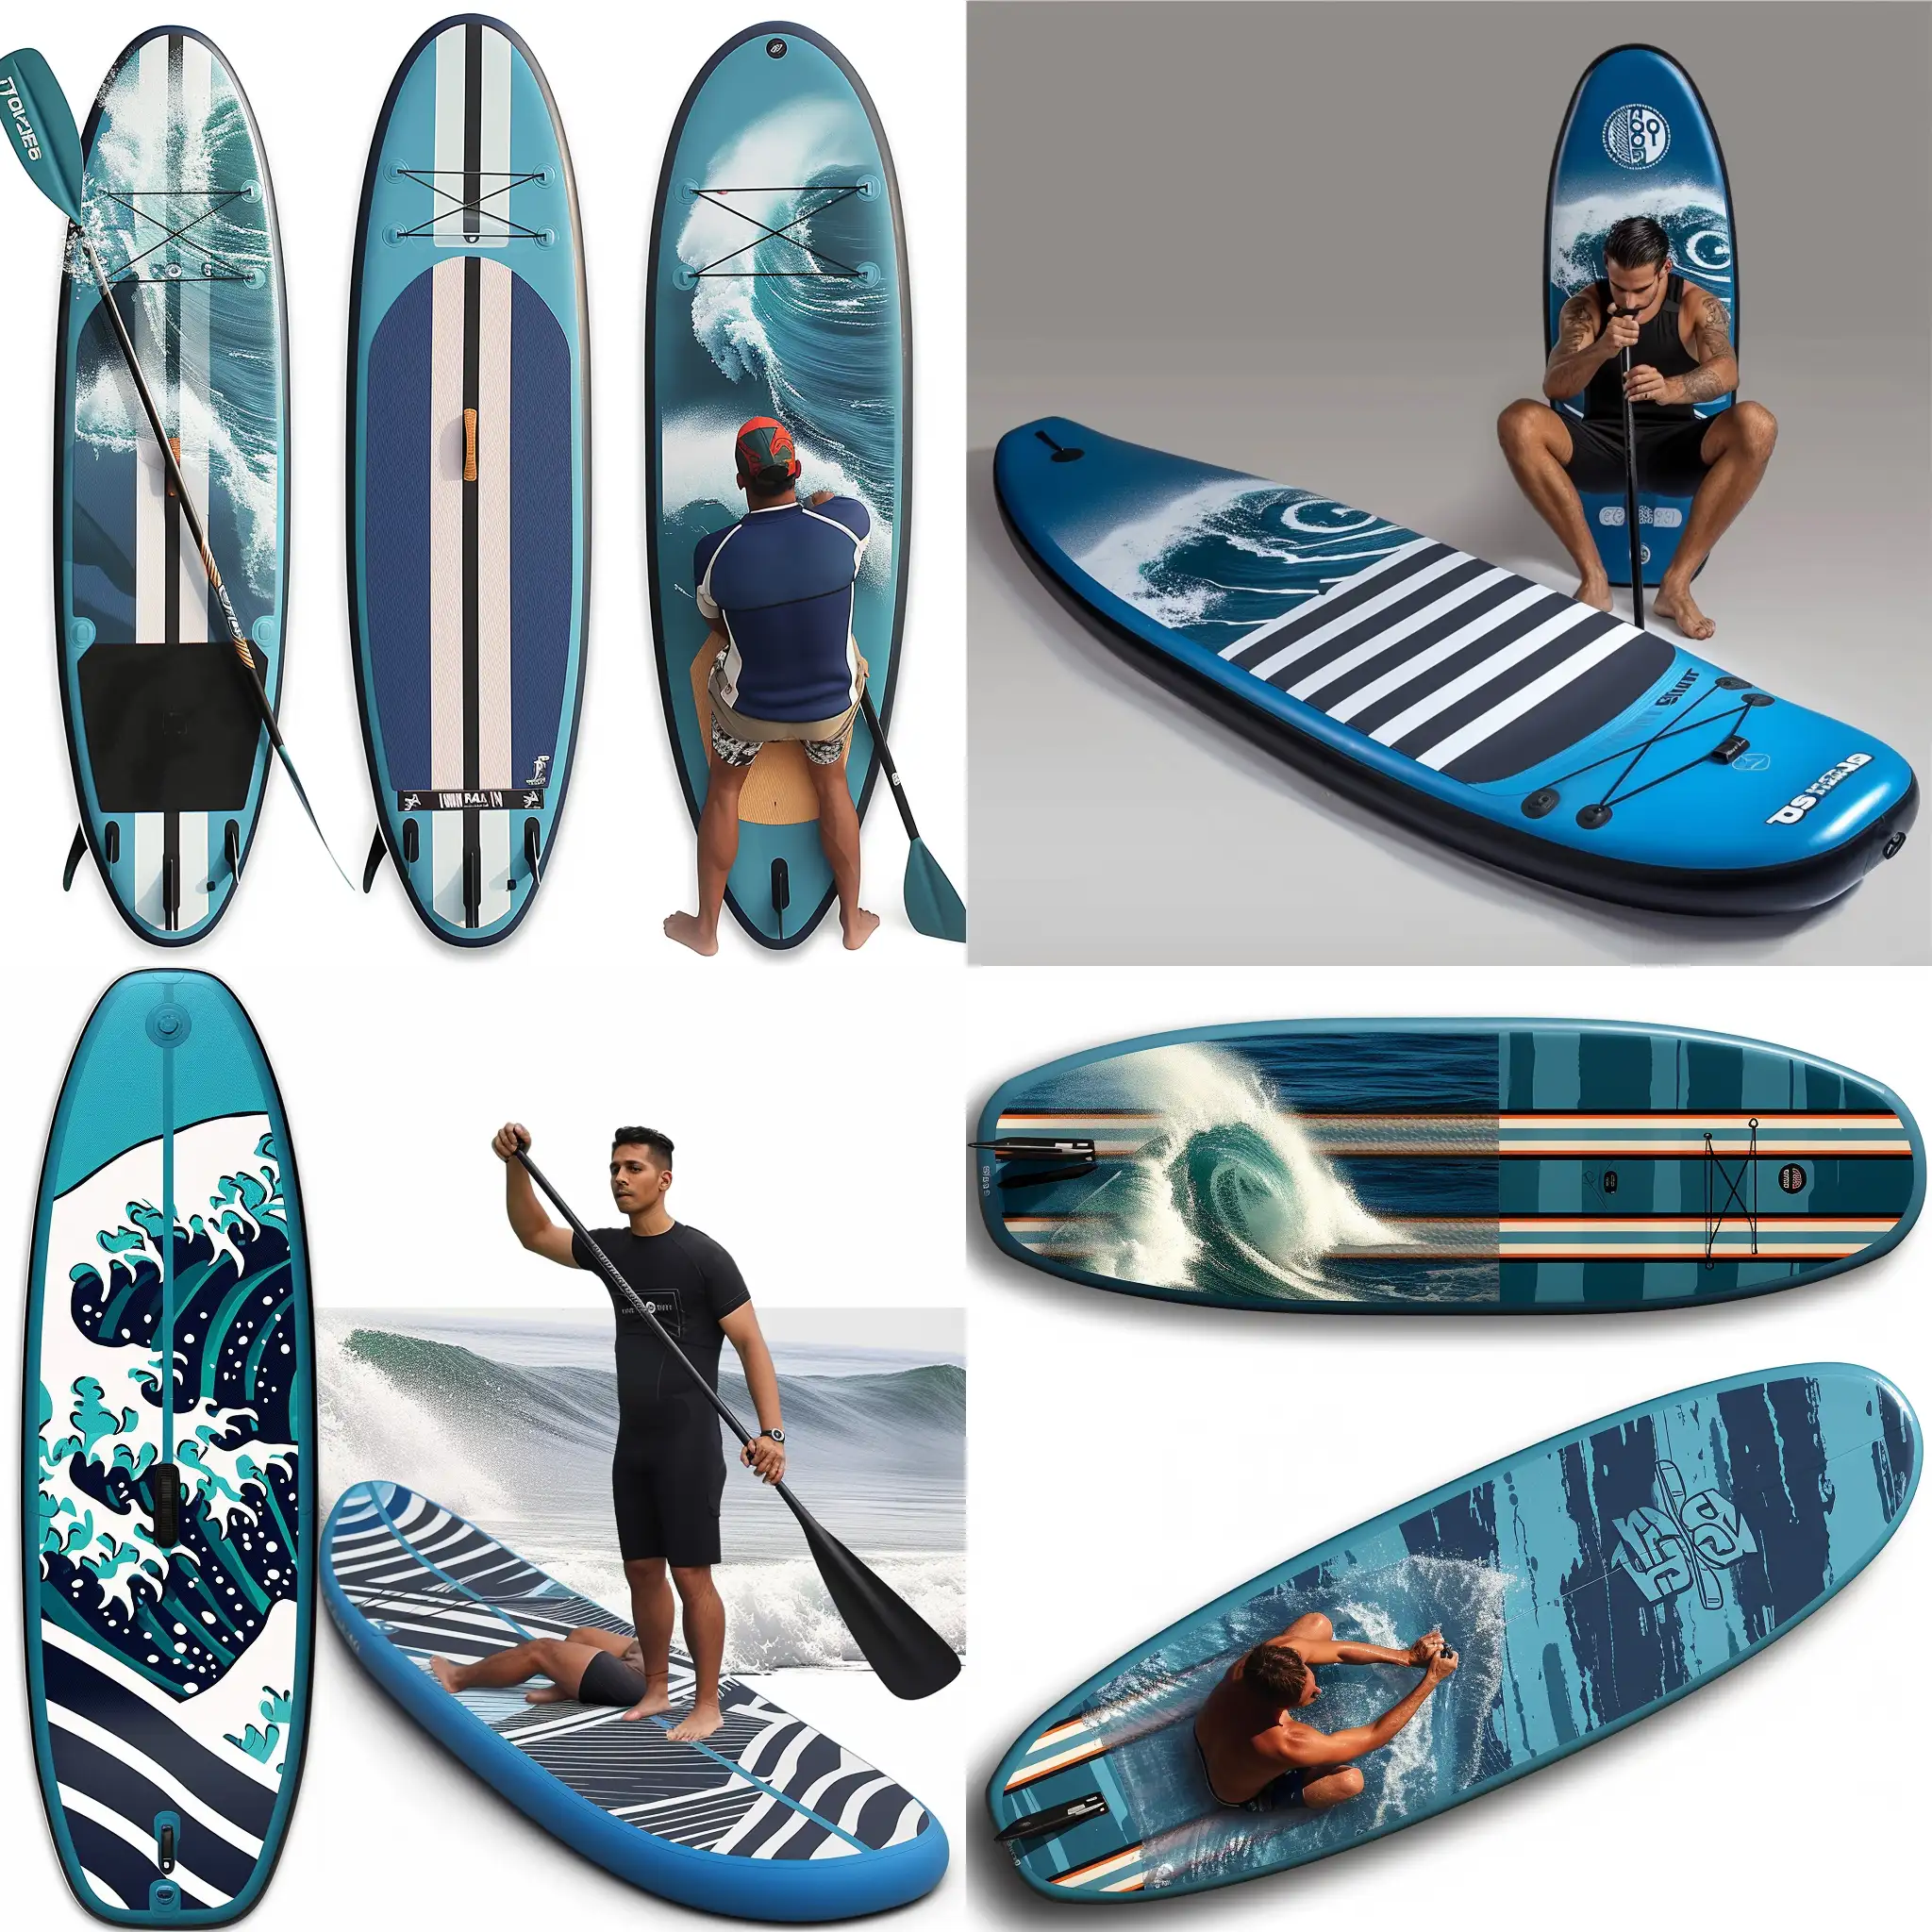 make a sup board its blue with a whave on and with white and black stripes. A man is standing an paddeling and  is sitting on it.